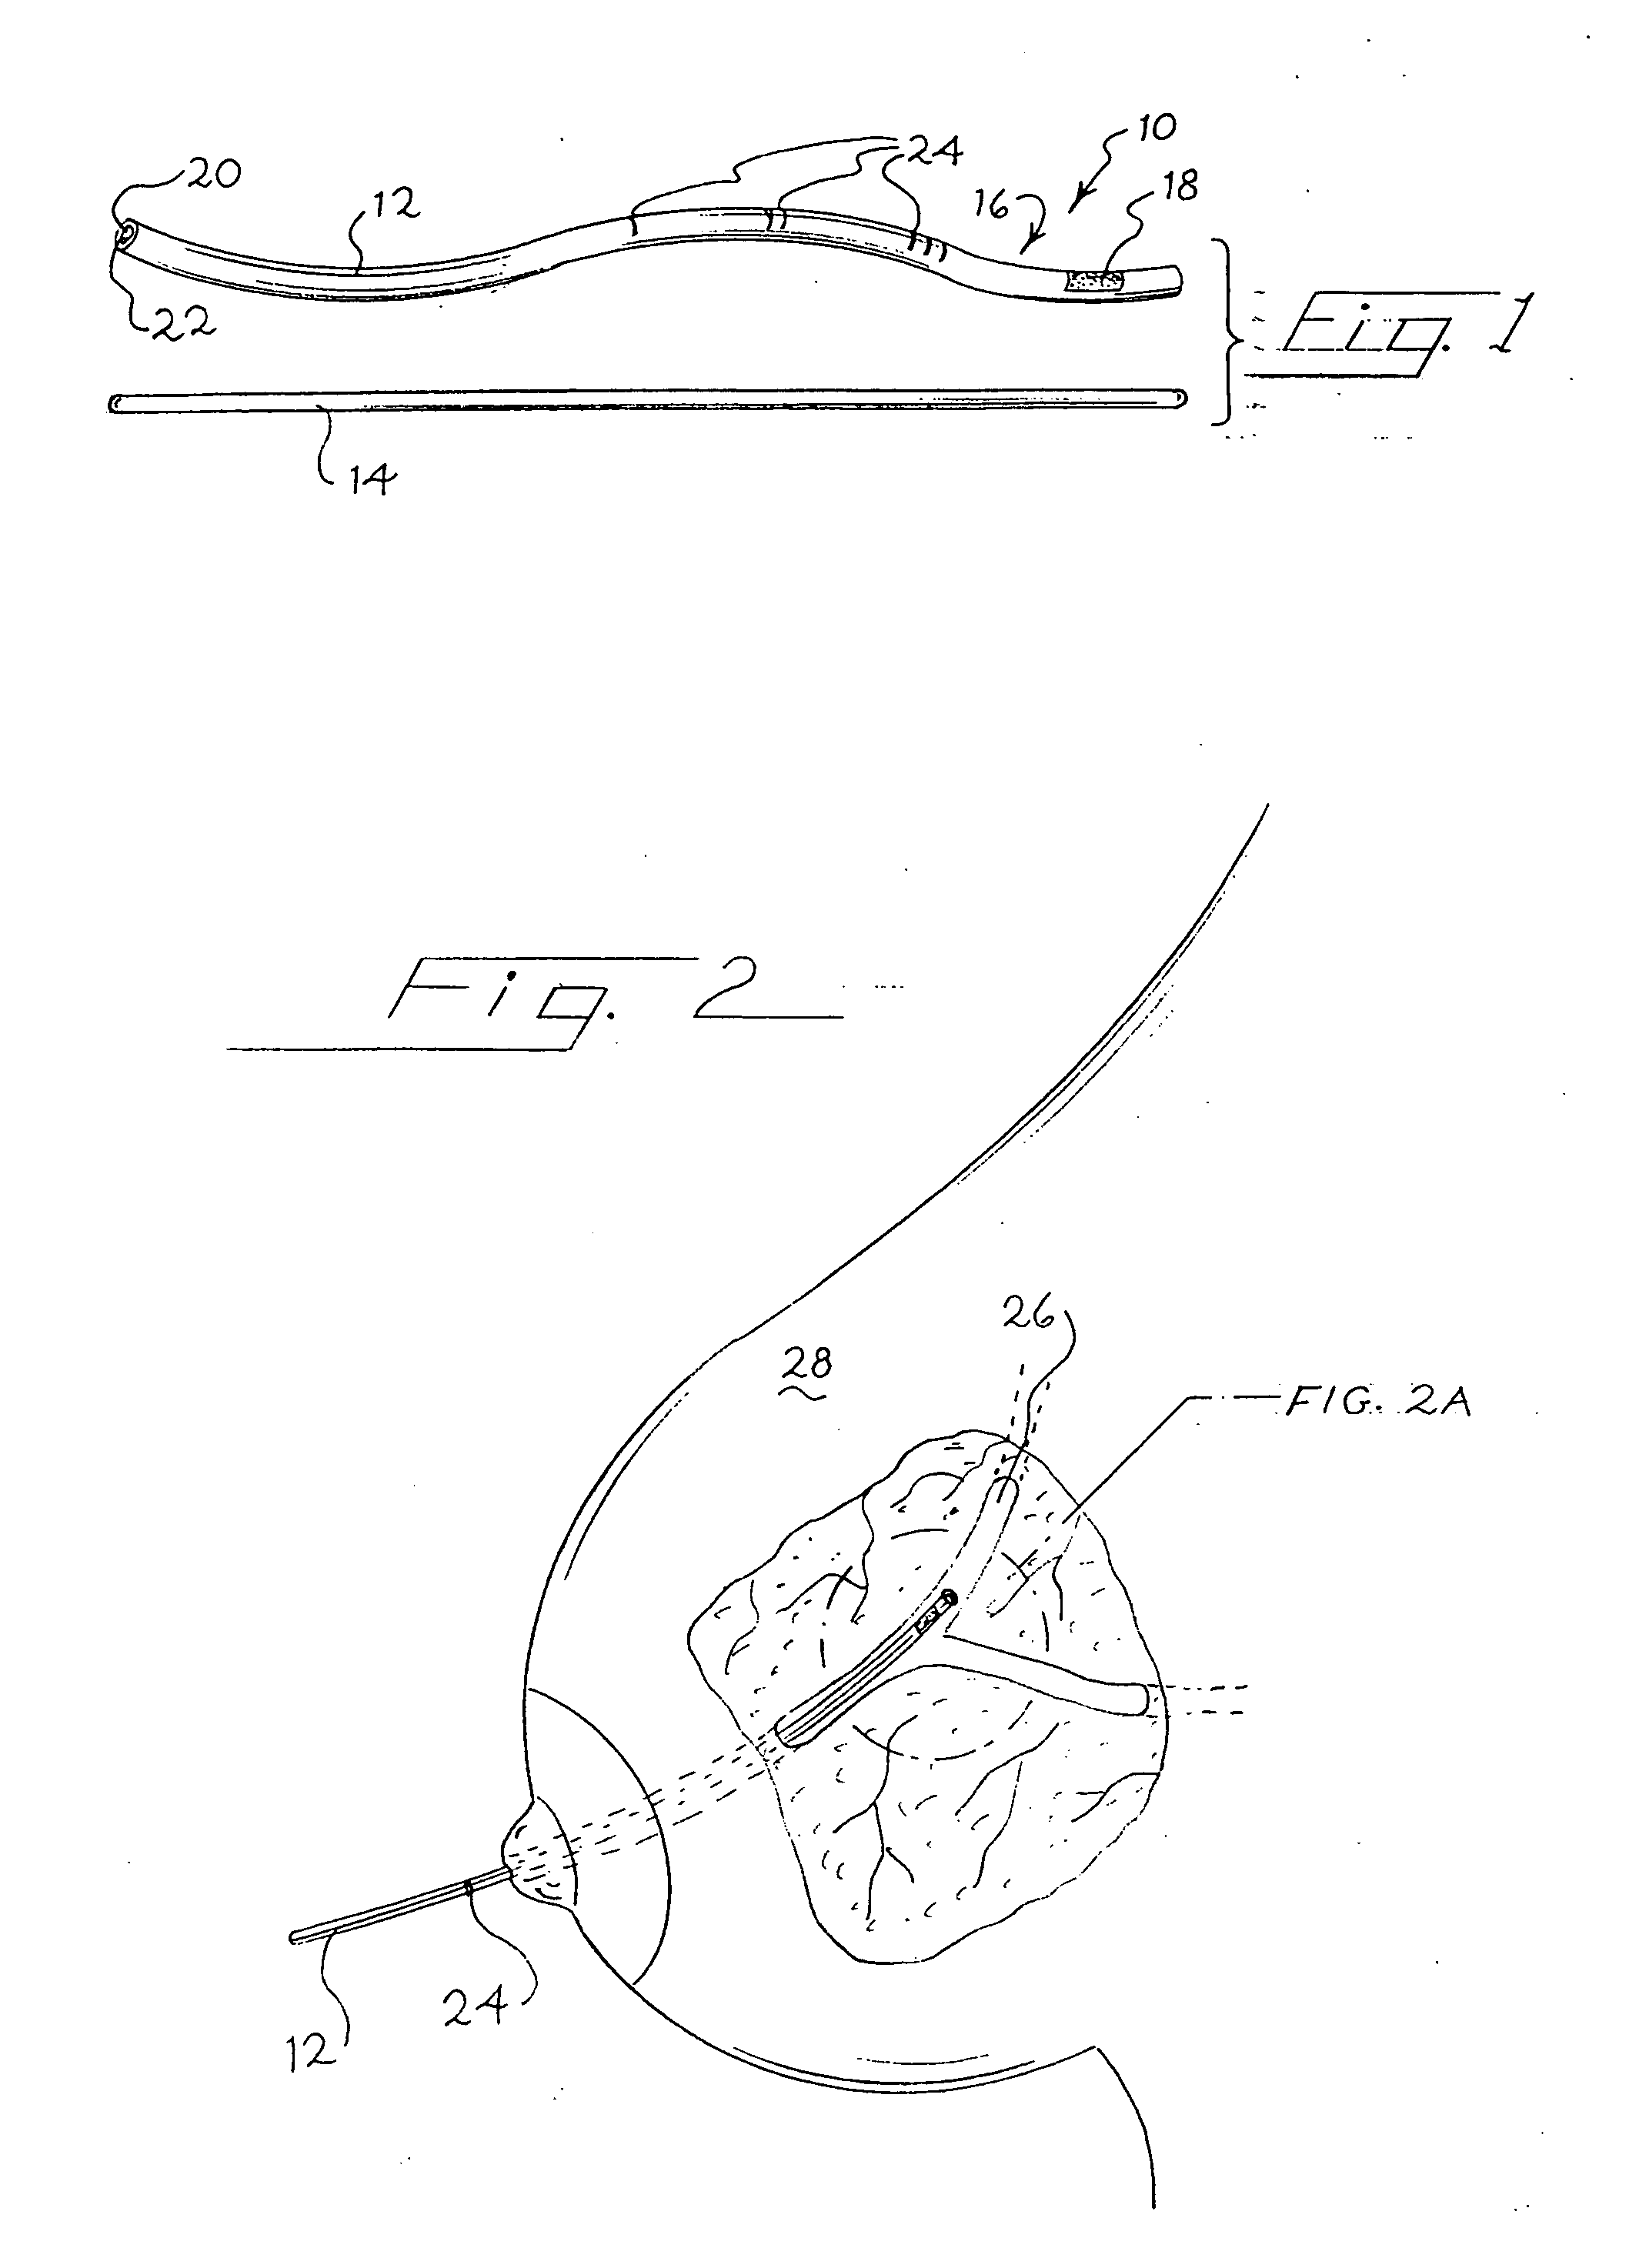 Marker and cut down guide assembly for human mammary duct procedures and method